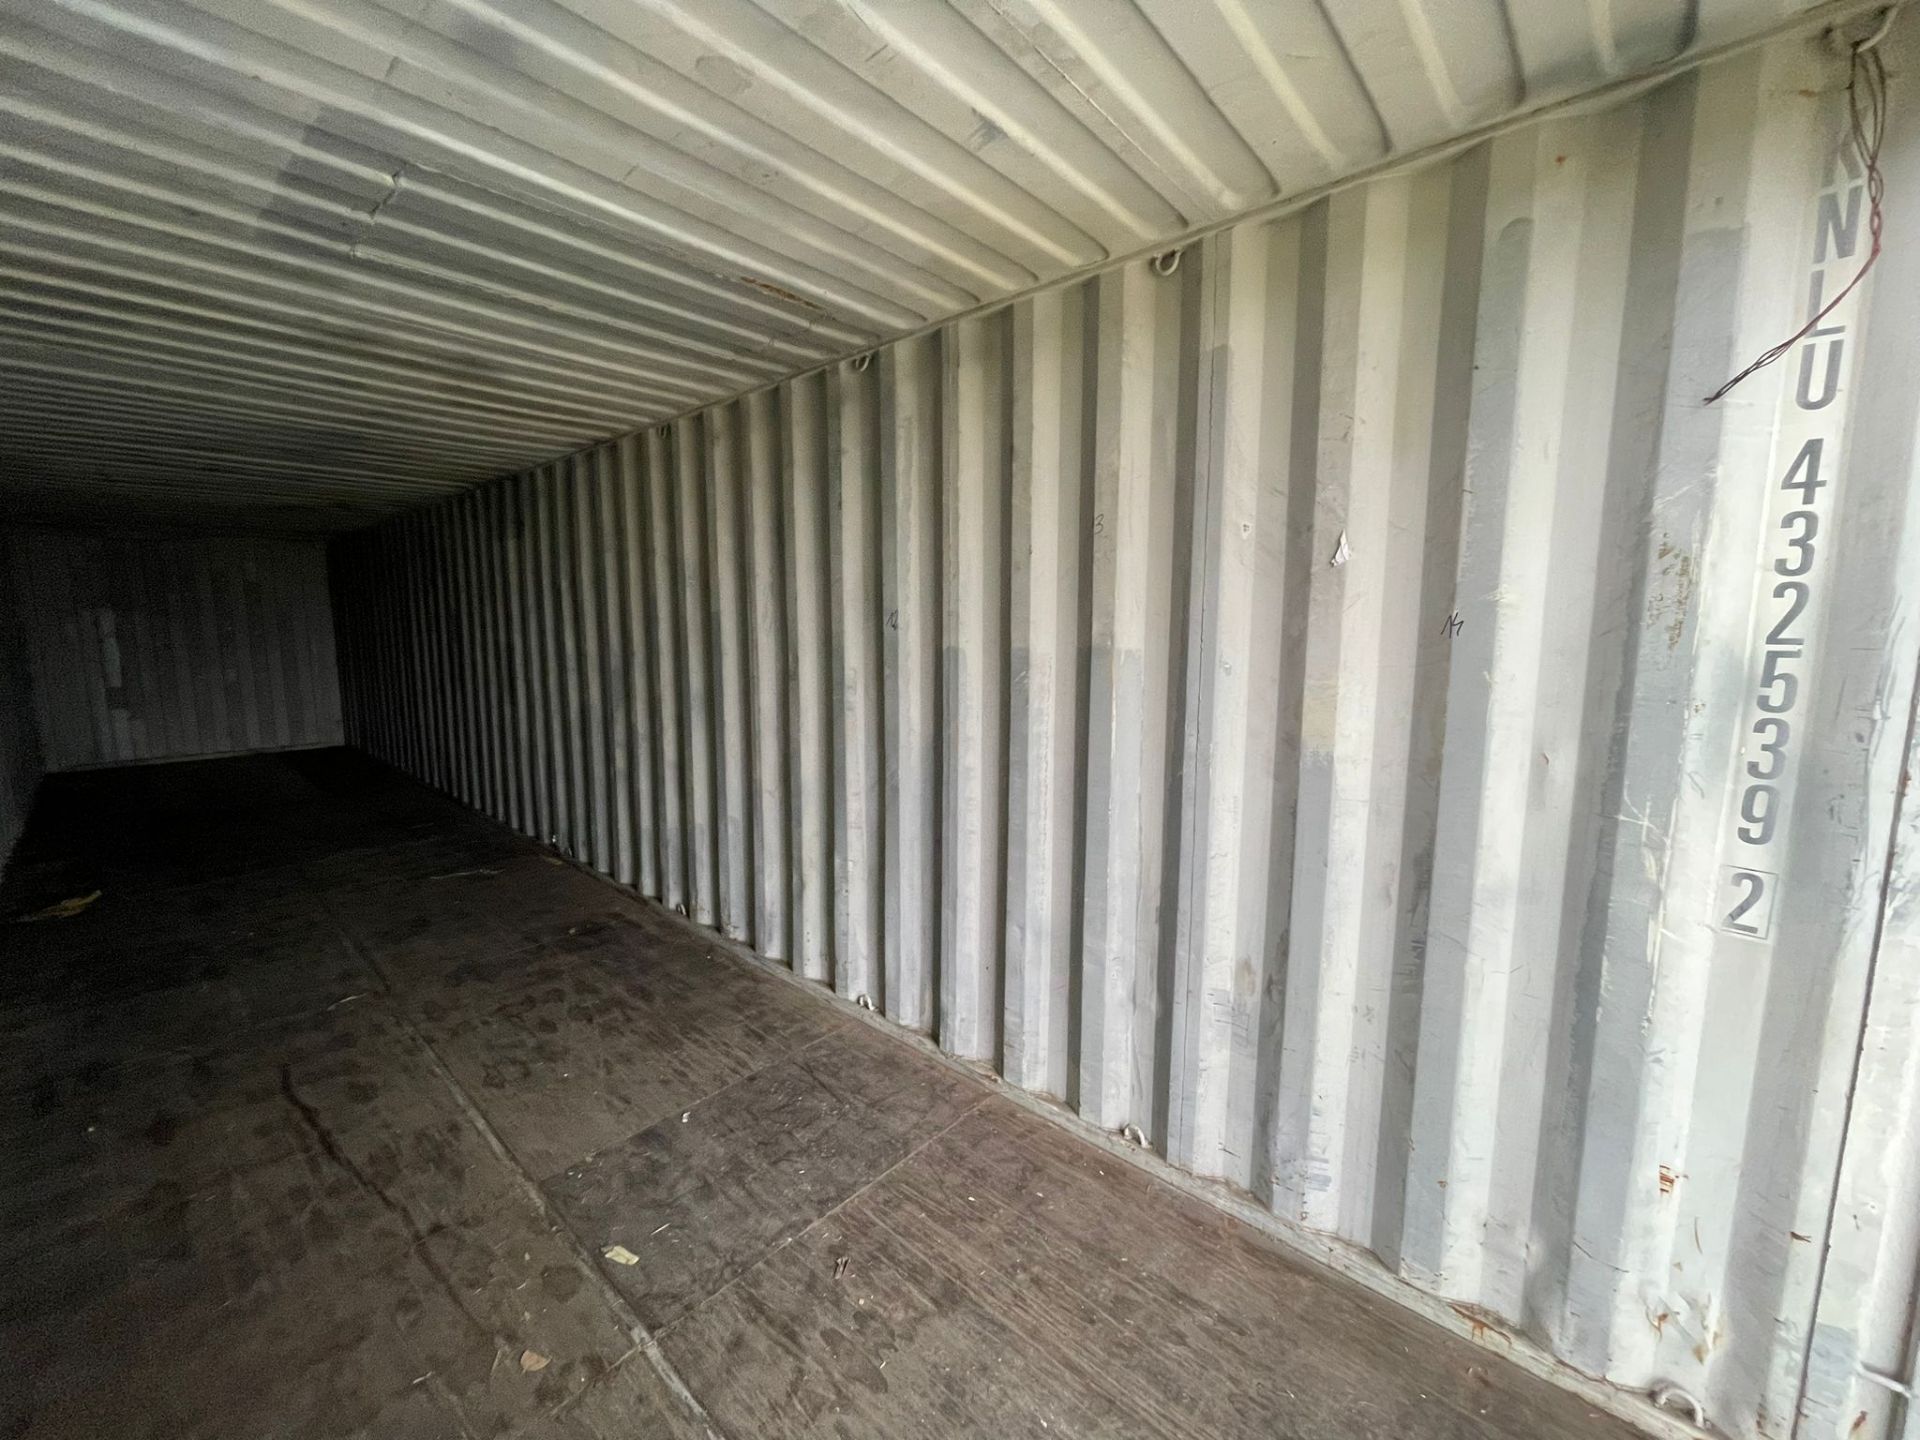 Shipping Container - ref KNLU4325392 - NO RESERVE (40’ GP - Standard) - Image 2 of 5